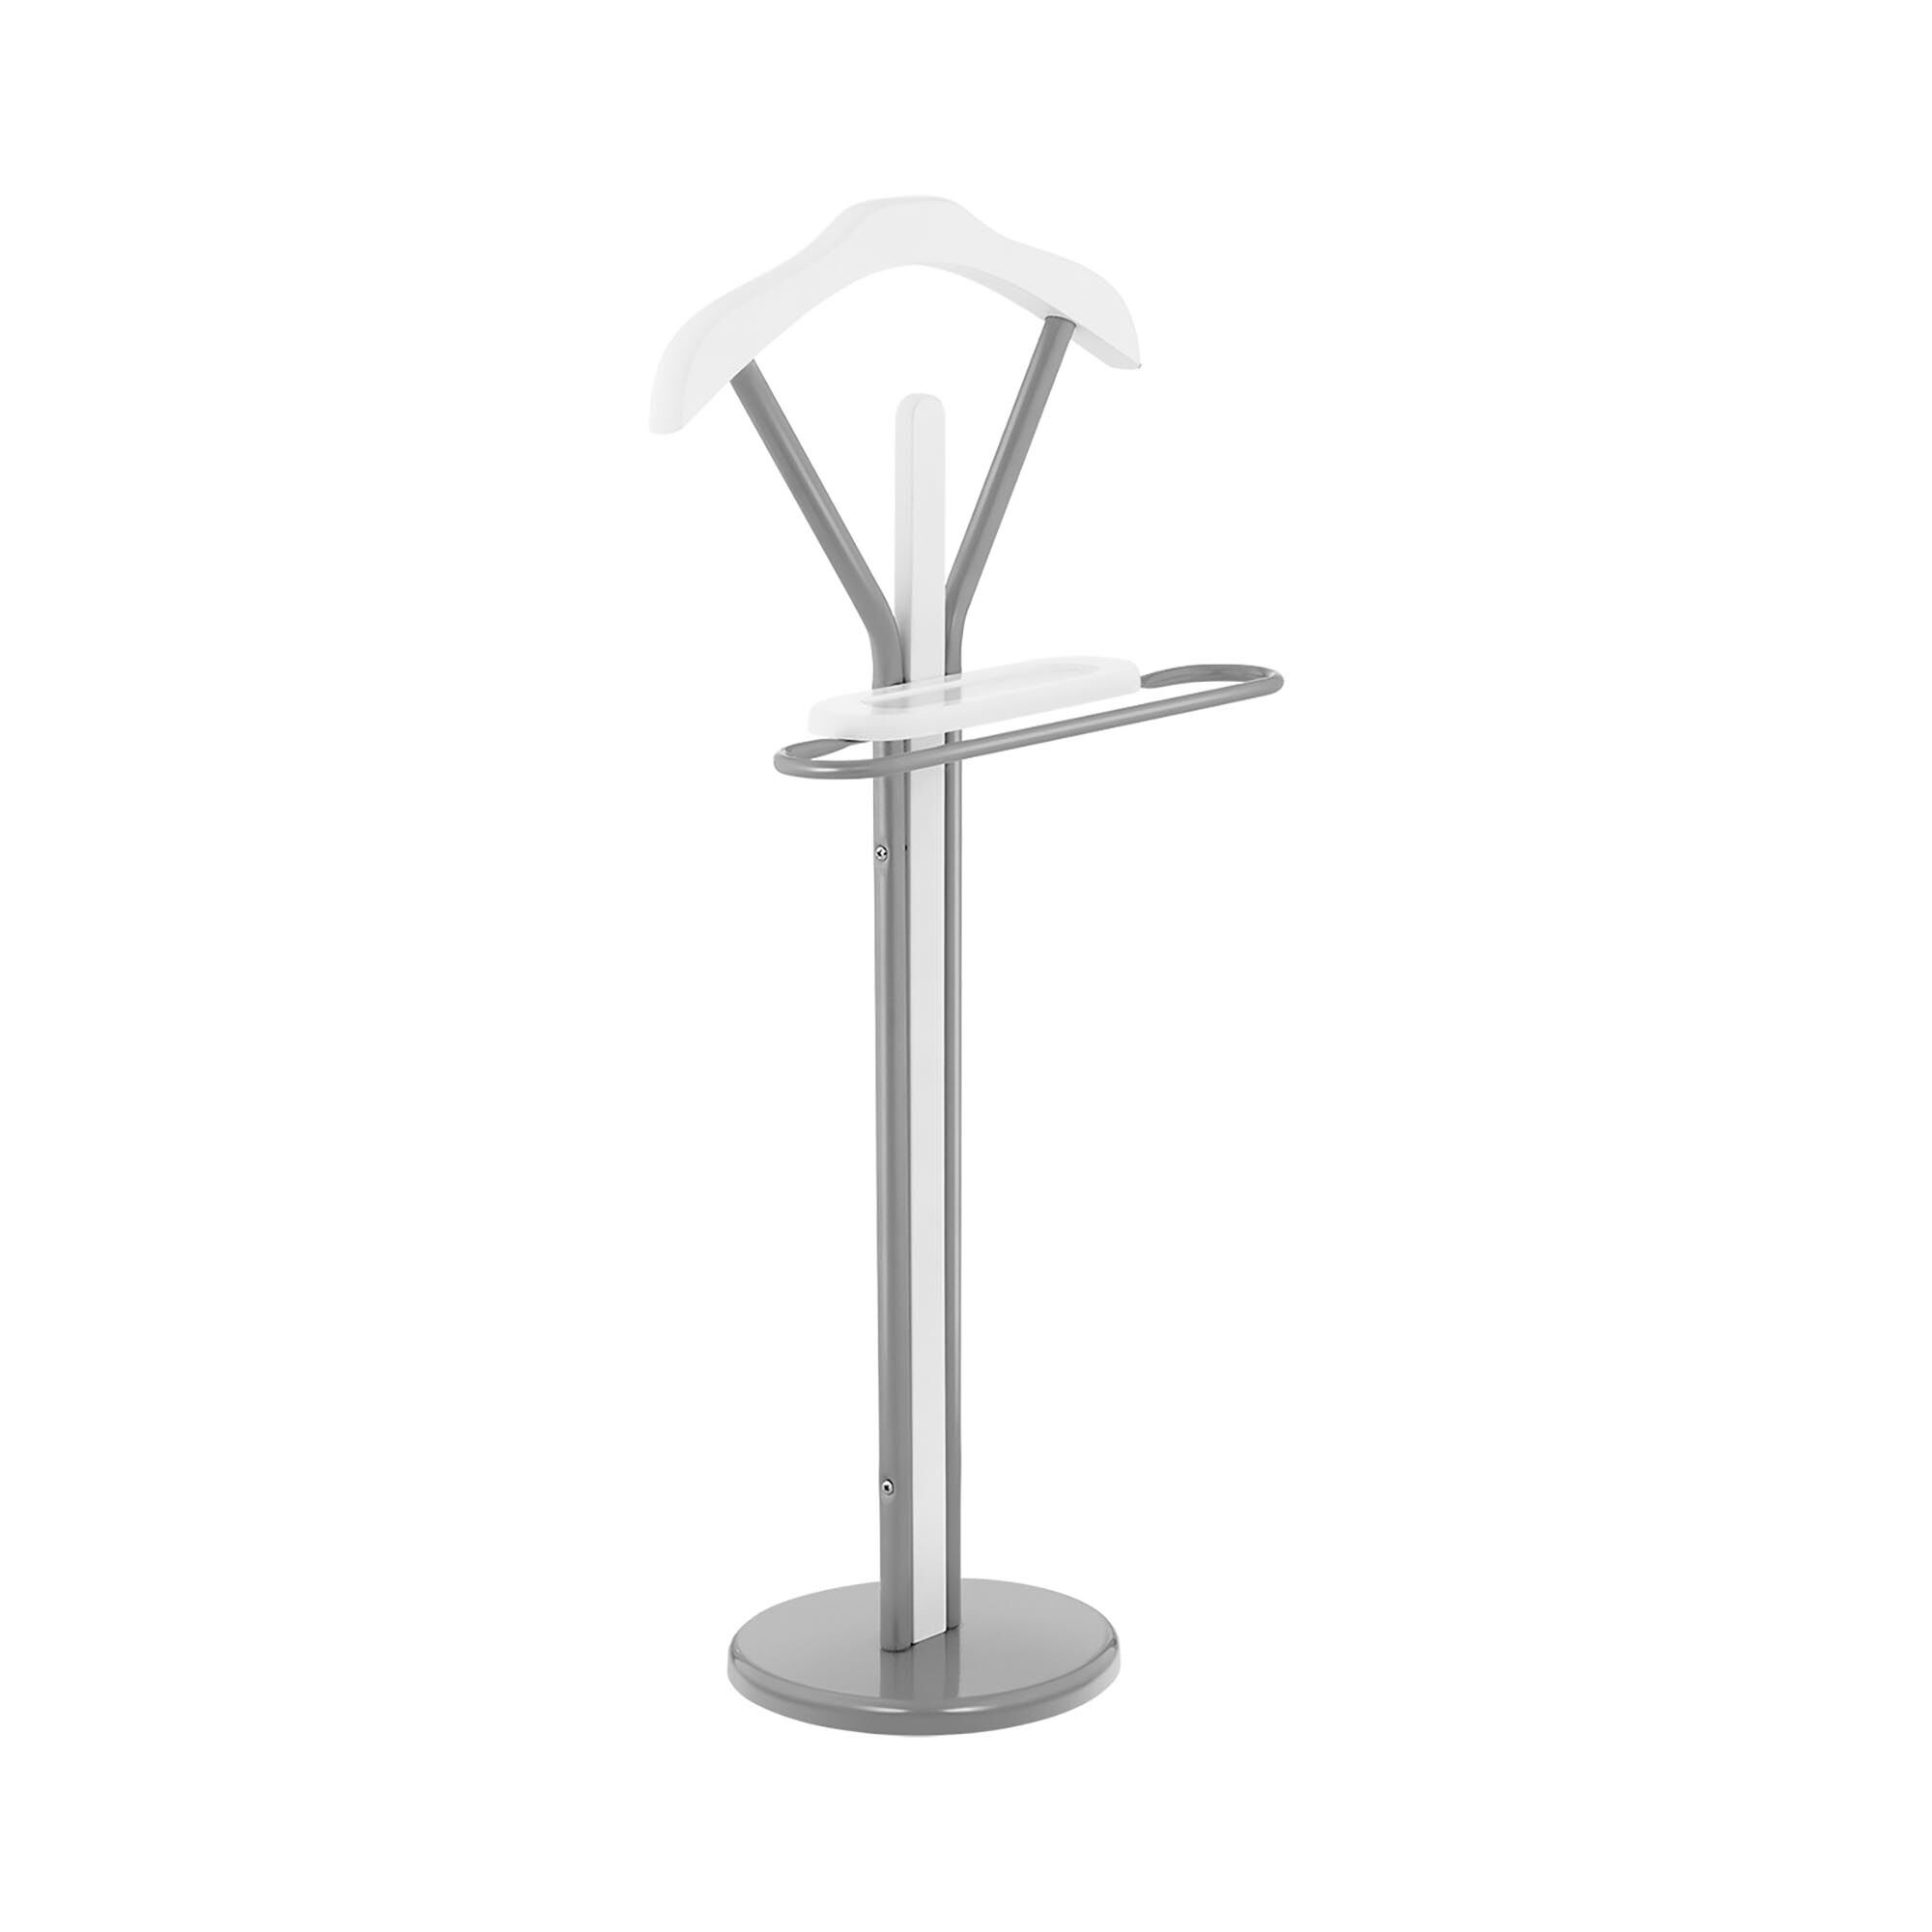 Uniprodo Clothes Valet Stand - silver / white